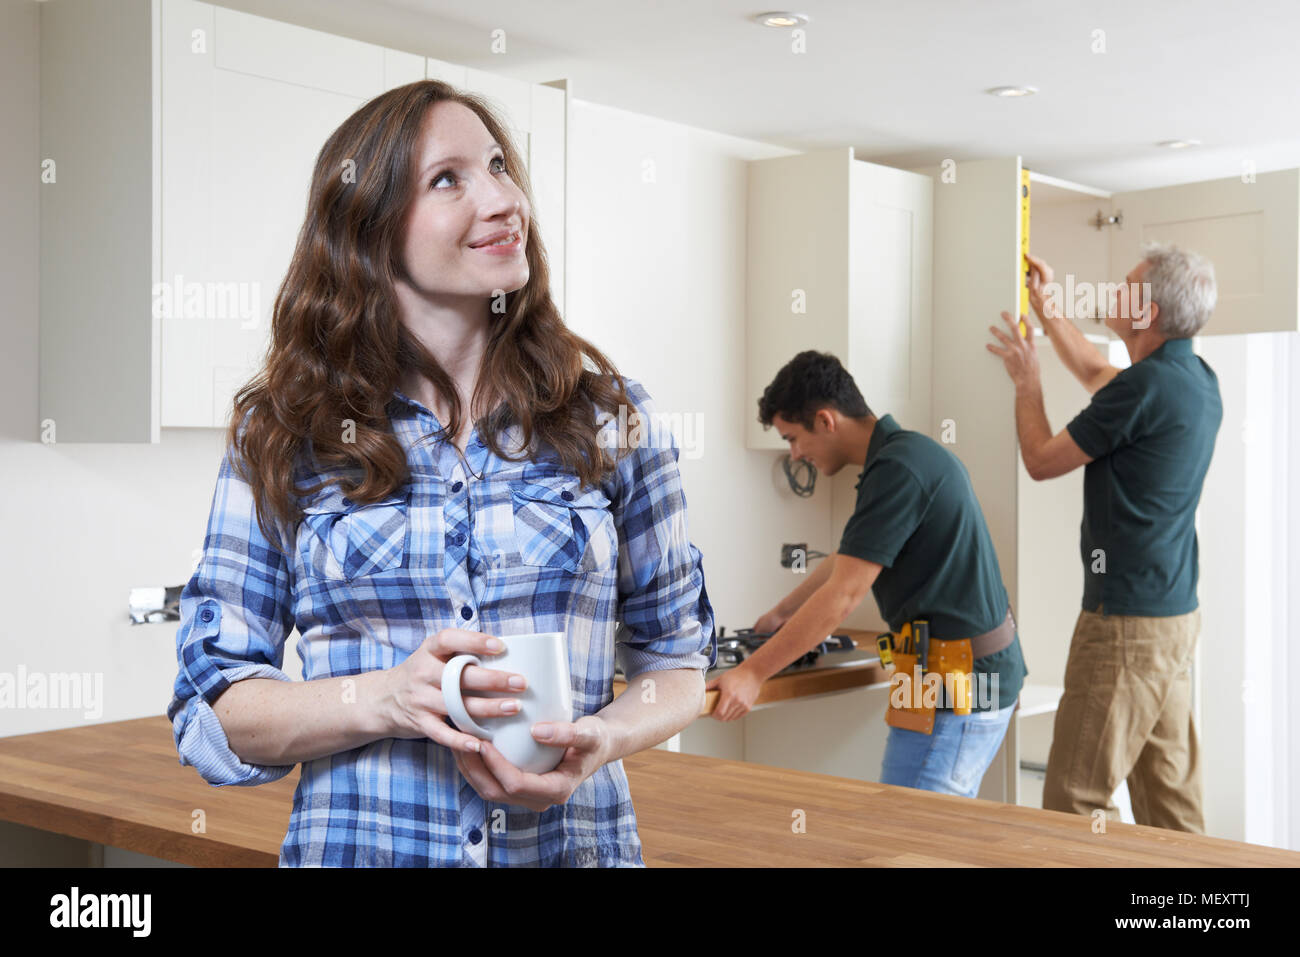 Woman Having New Kitchen Fitted Drinking Cup Of Coffee Stock Photo